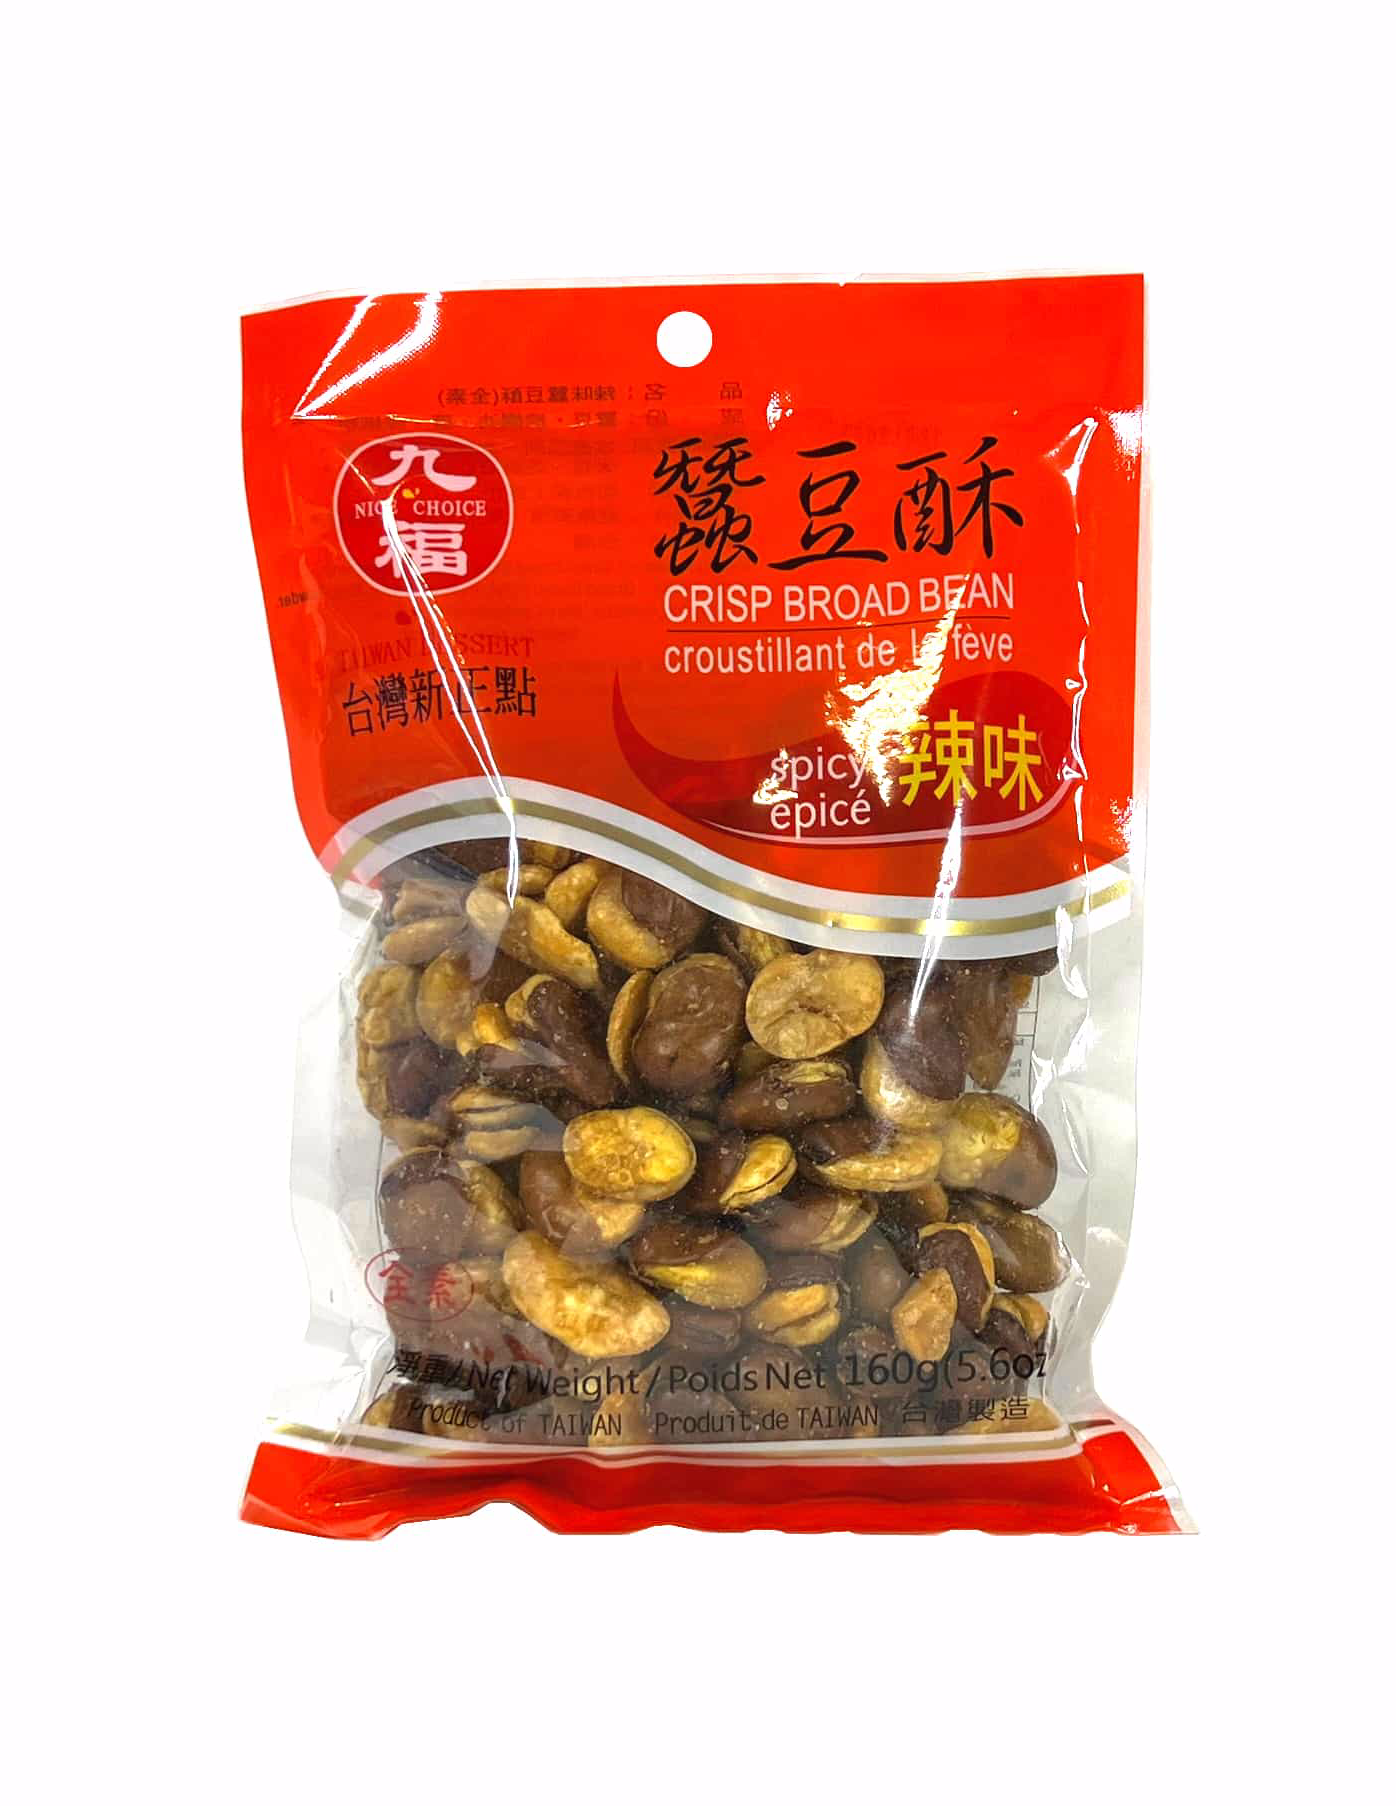 Crisp Broad Bean With Spicy Flavour 160g Nice Choice Taiwan